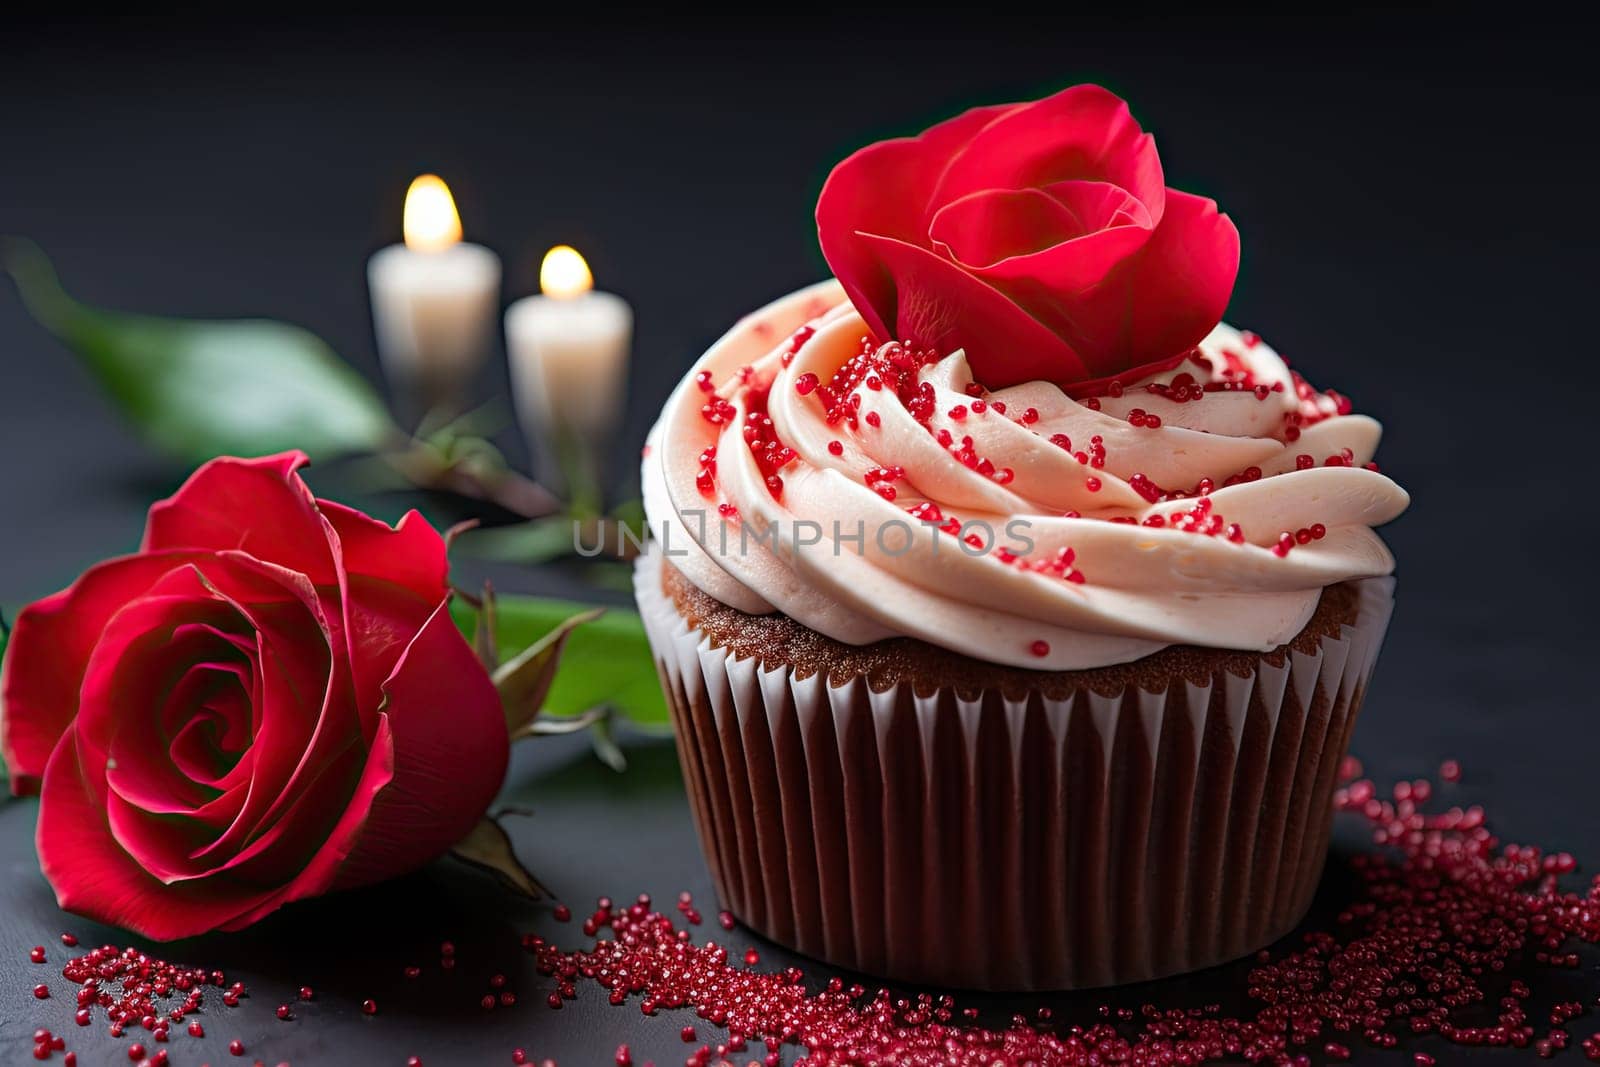 A cupcake with white frosting and a red rose created with generative AI technology by golibtolibov